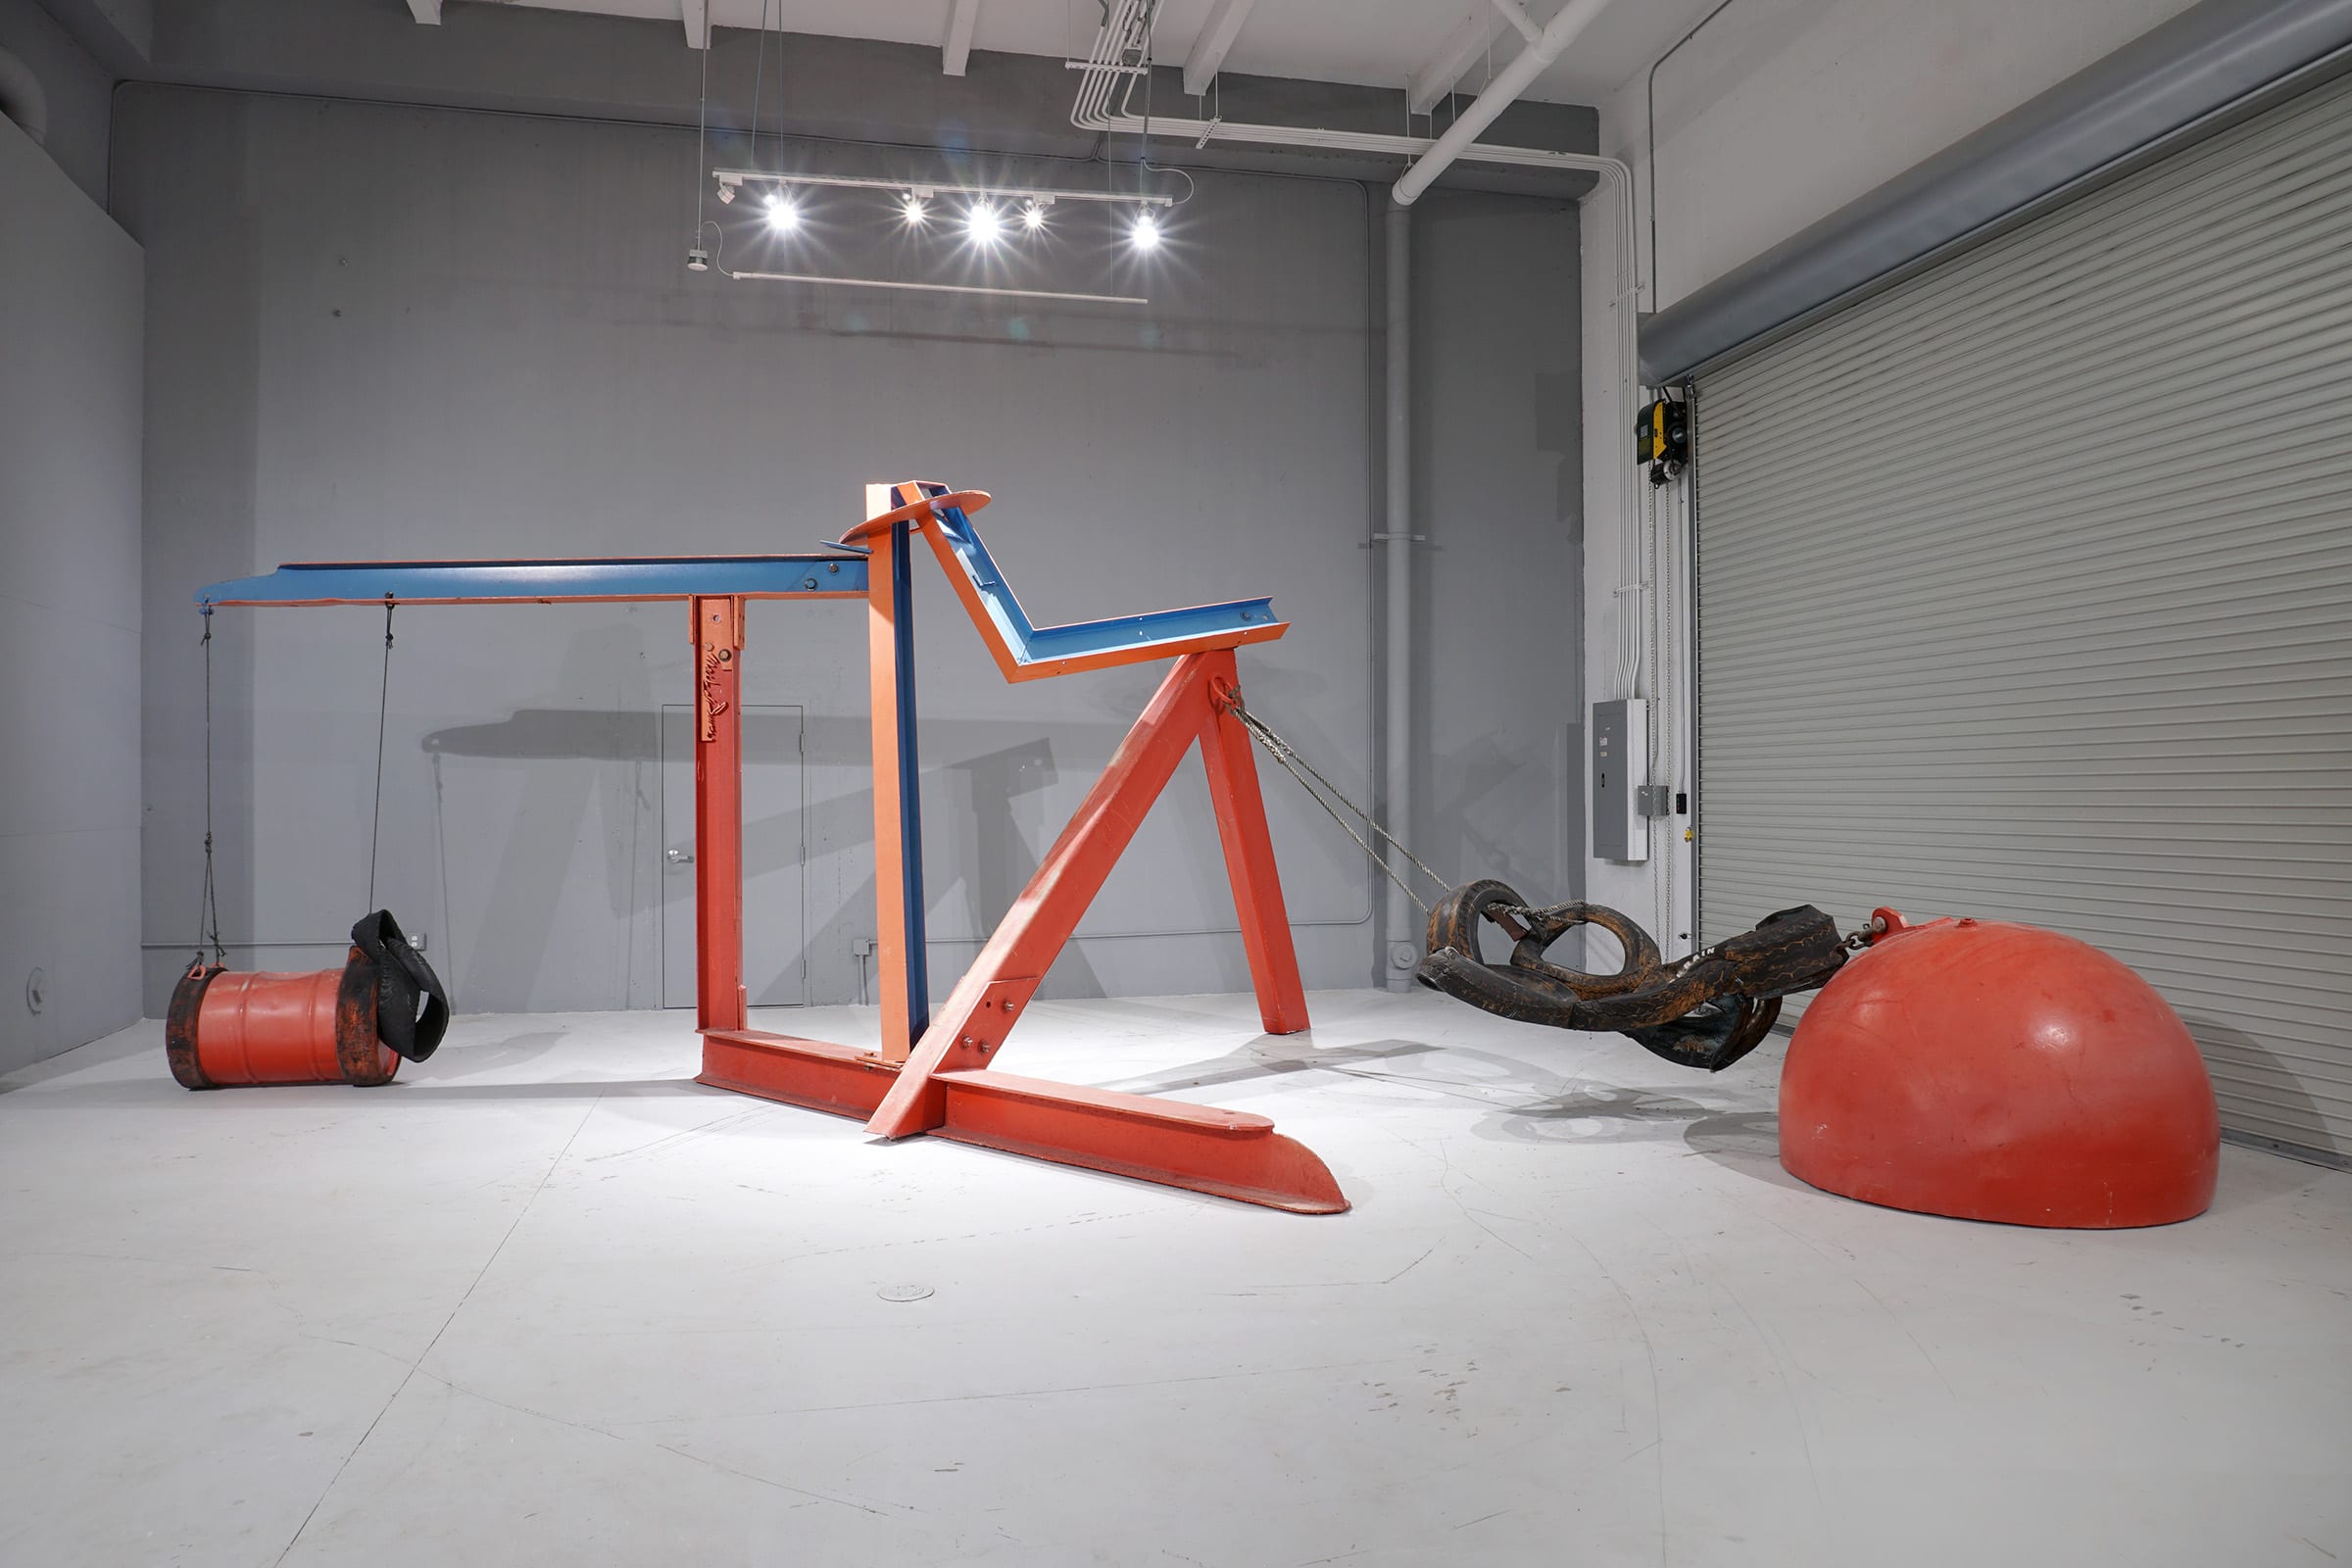 Installation view of Mark di Suvero, Untitled, 1977, at Margulies Collection at the Warehouse. Courtesy of the Margulies Collection.